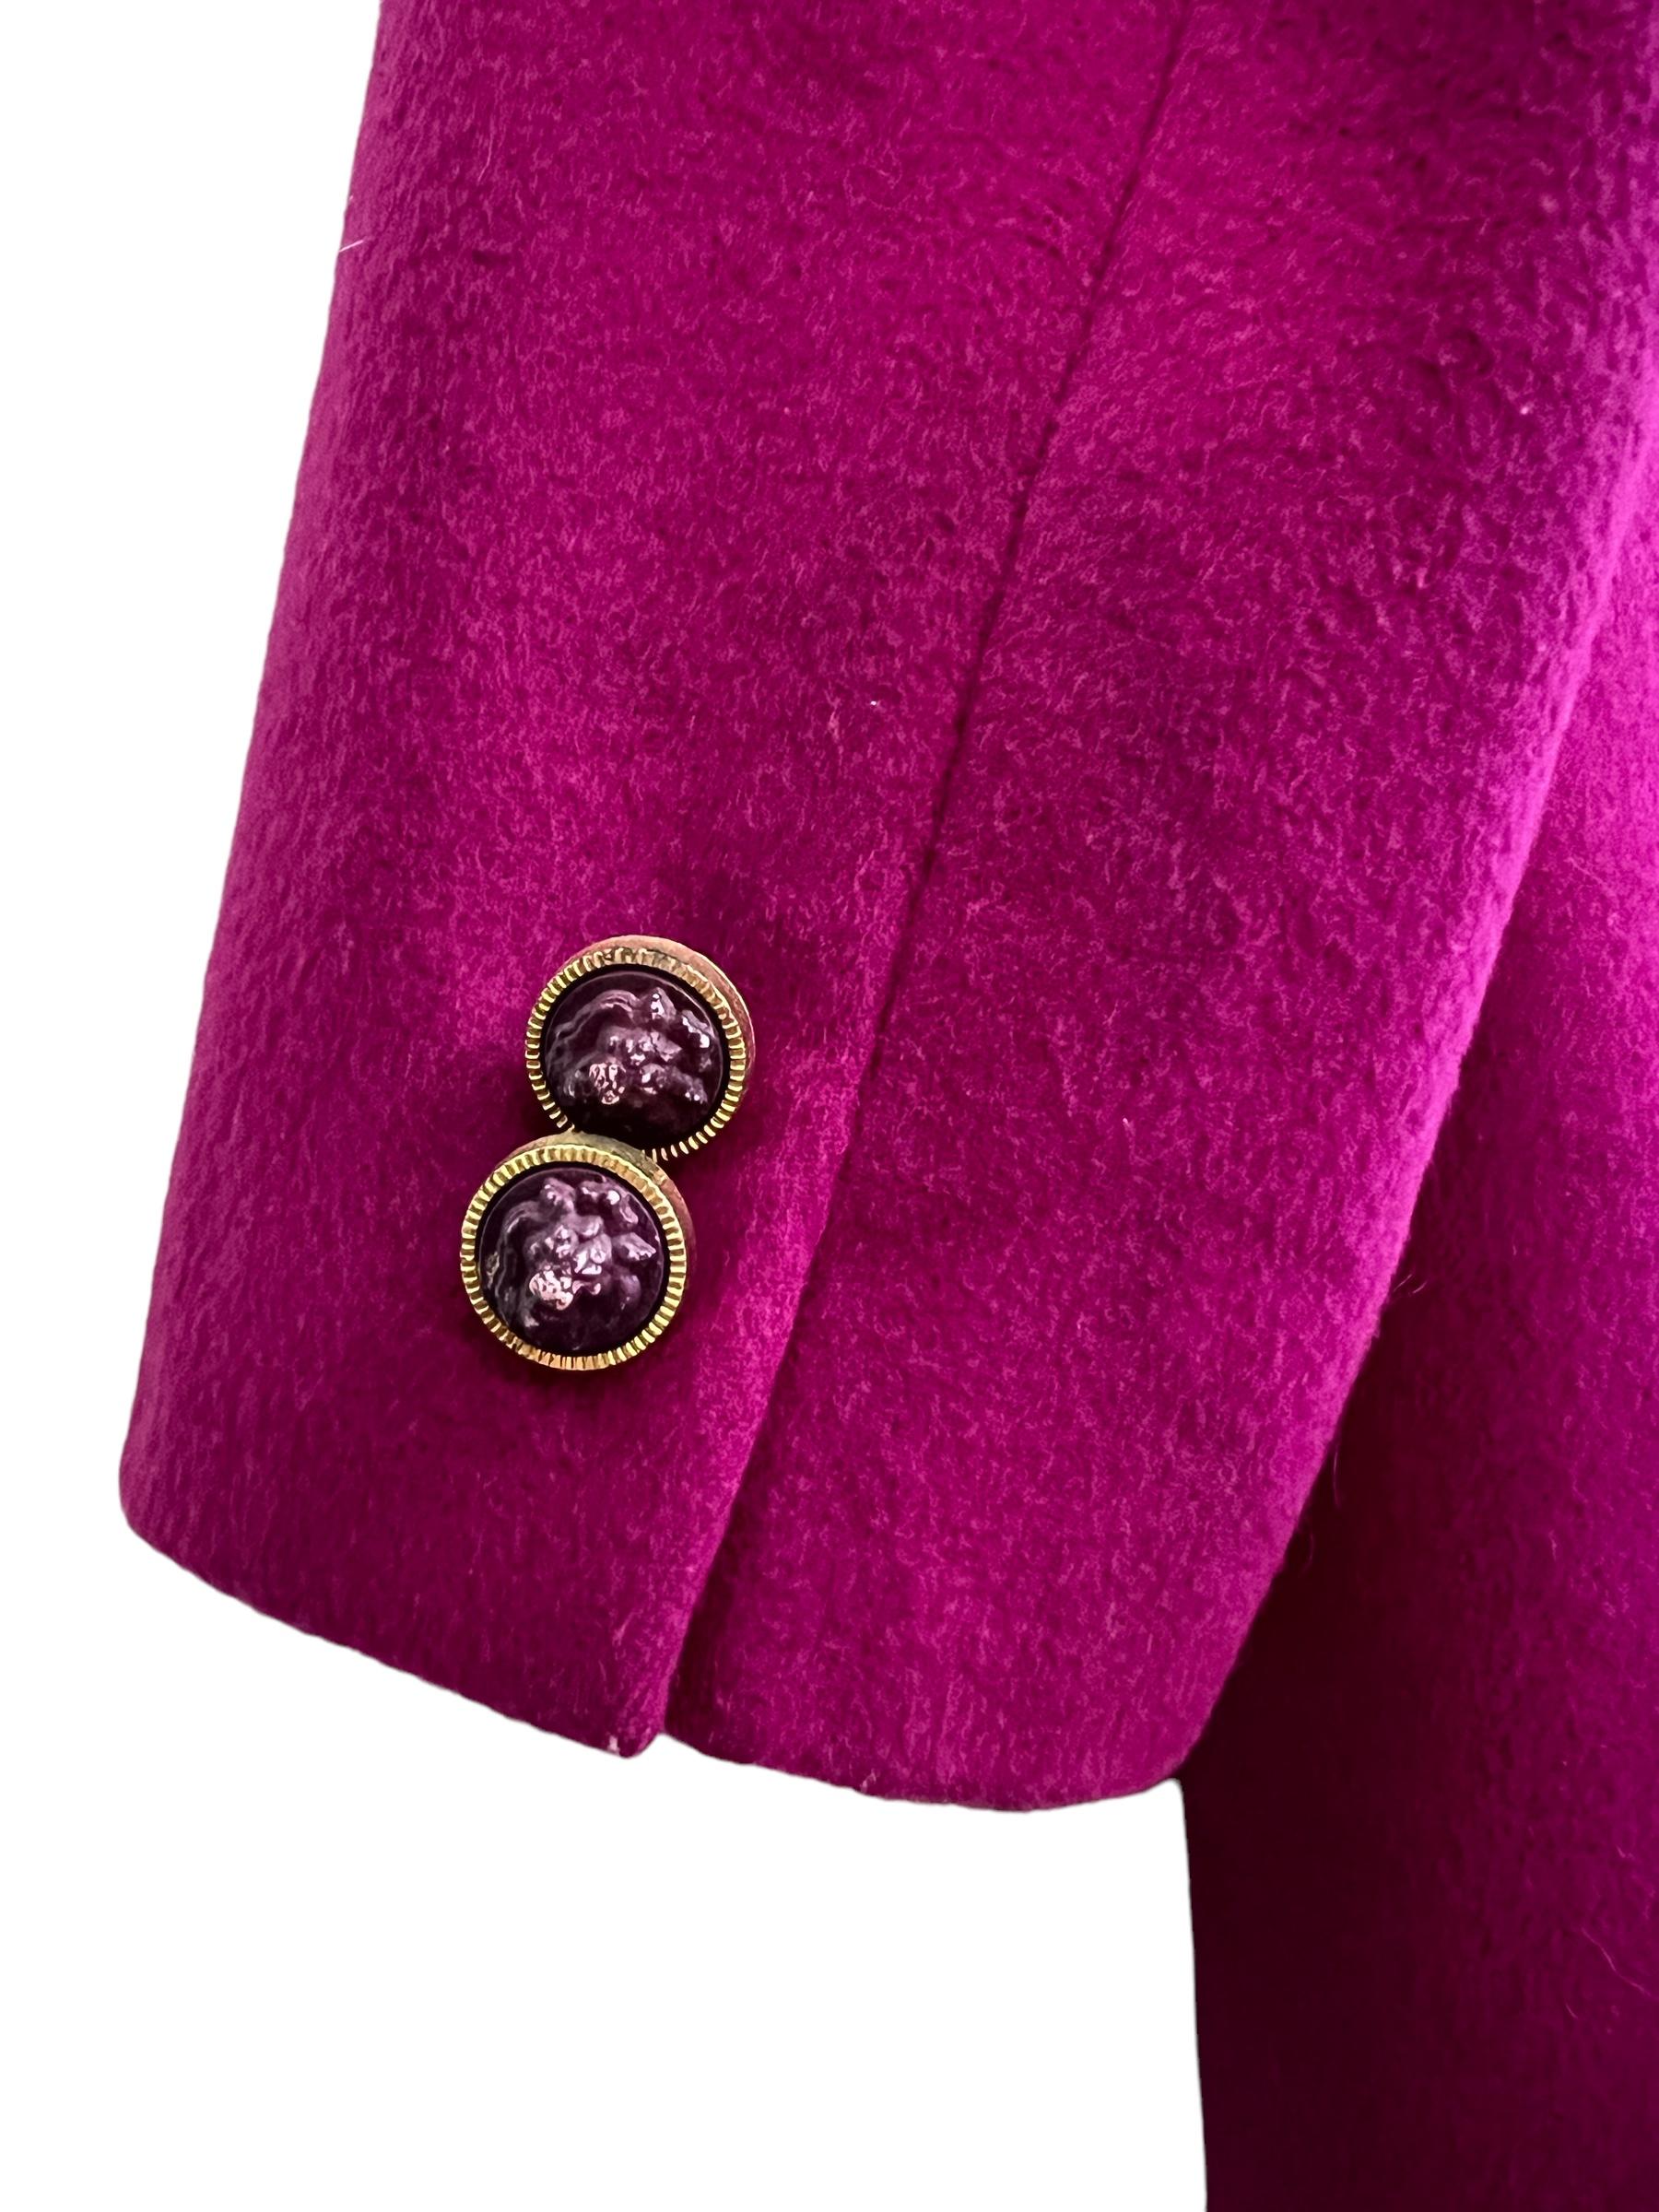 Versus by Gianni Versace Magenta Pink Rainbow Lined Cashmere Blazer Suit Jacket For Sale 2